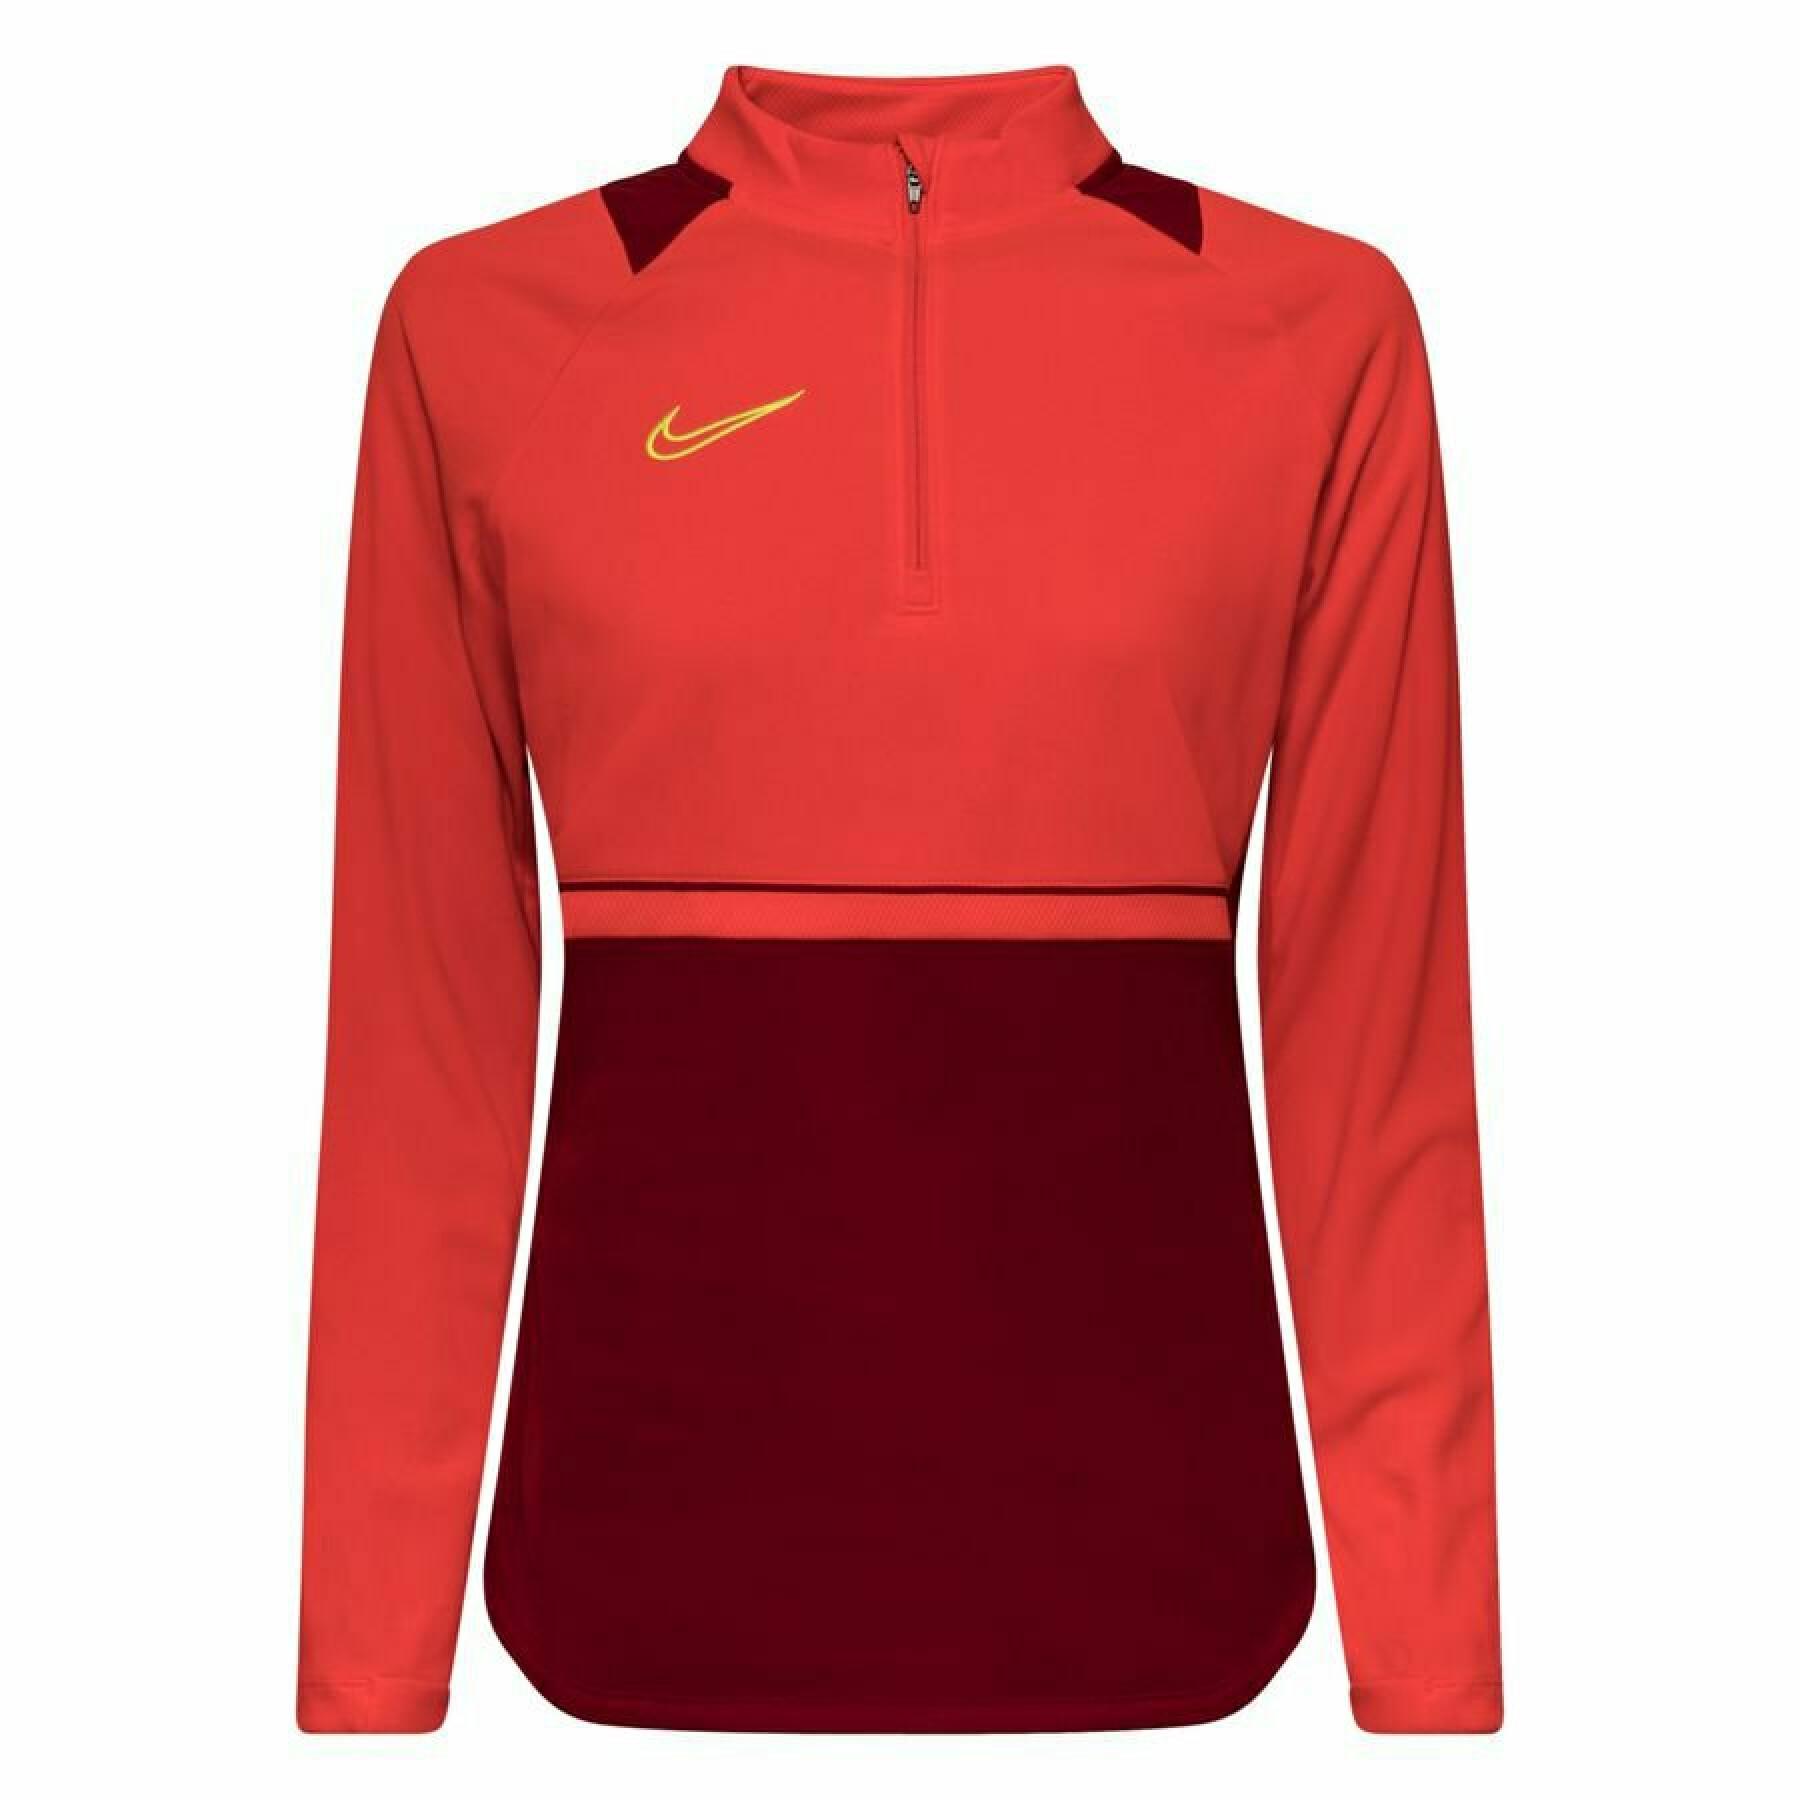 Maillot manches longues compression femme Nike Dri-FIT Academy